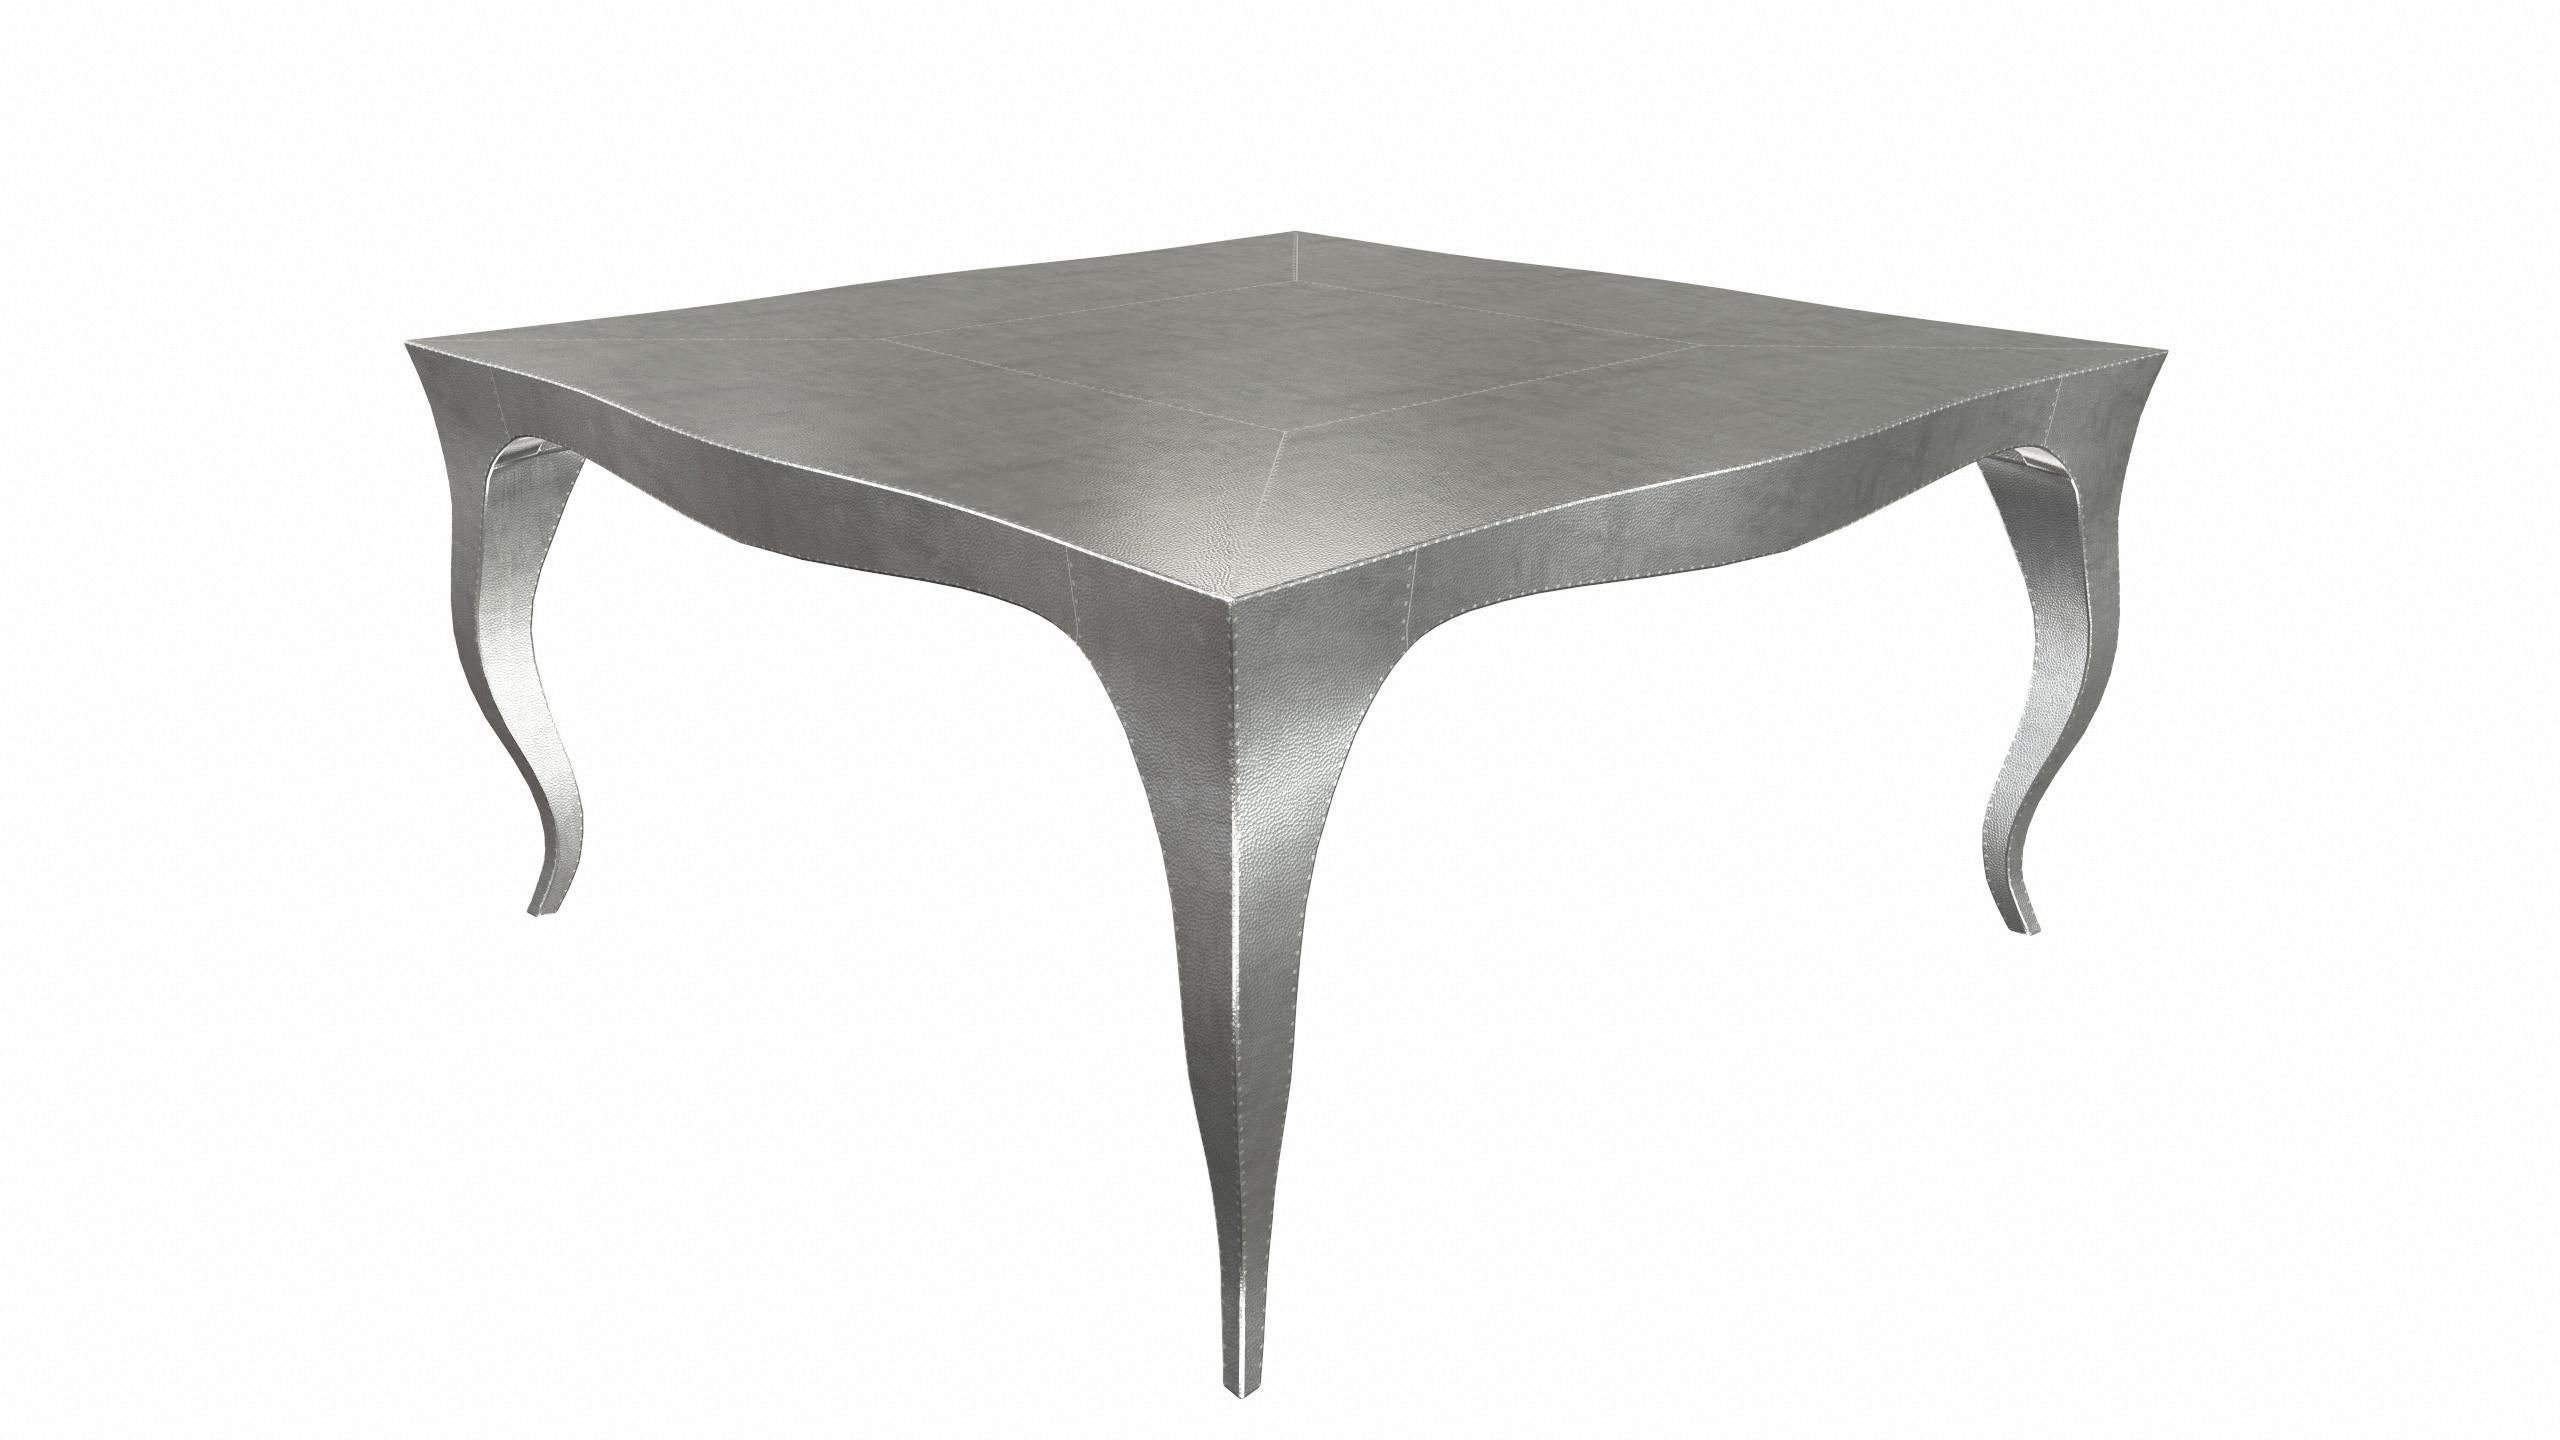 American Louise Art Deco Nesting Tables and Stacking Tables Mid. Hammered White Bronze  For Sale